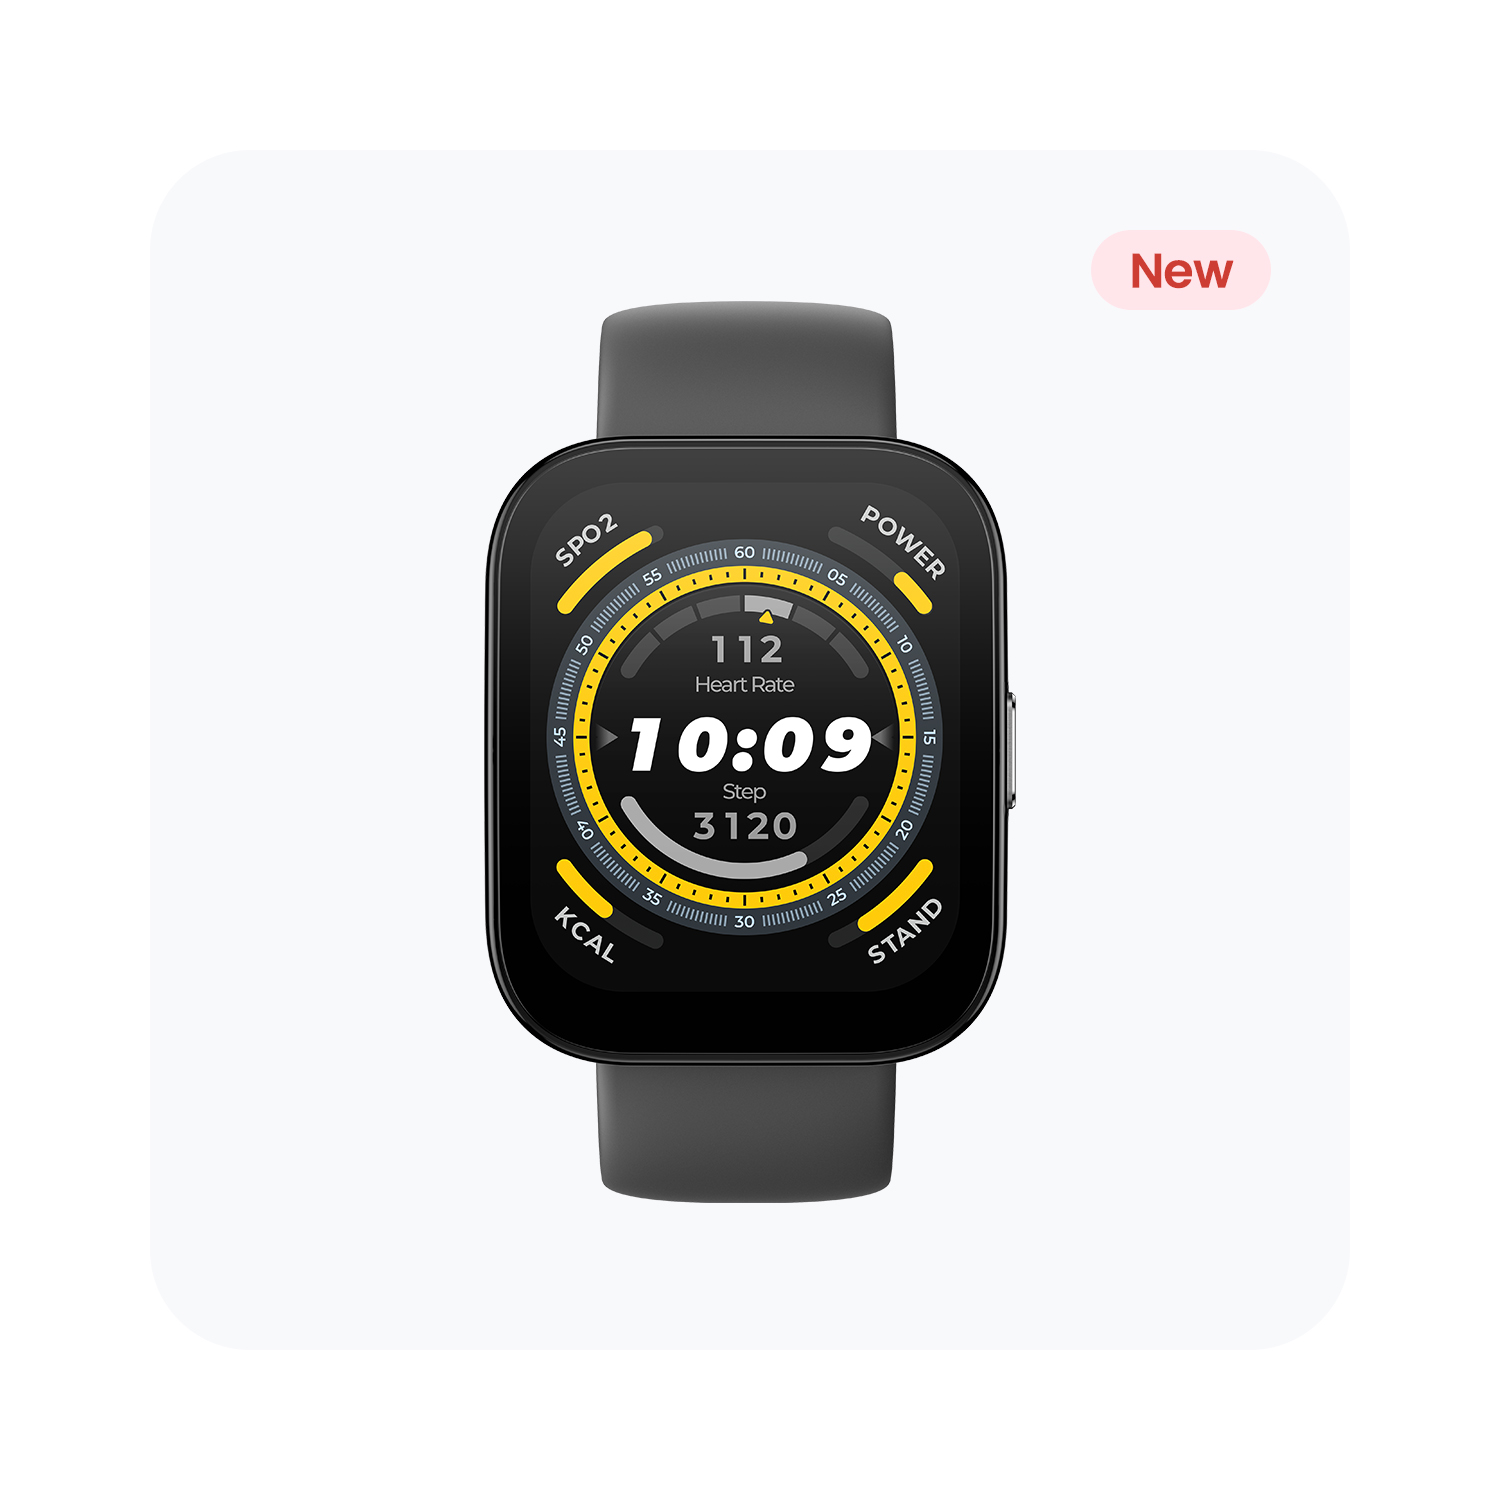 📢 Here's an early #NewYear gift for all you #Amazfit #Balance users!  Download the new update & get in the winter spirit now ❄️ Here's what …